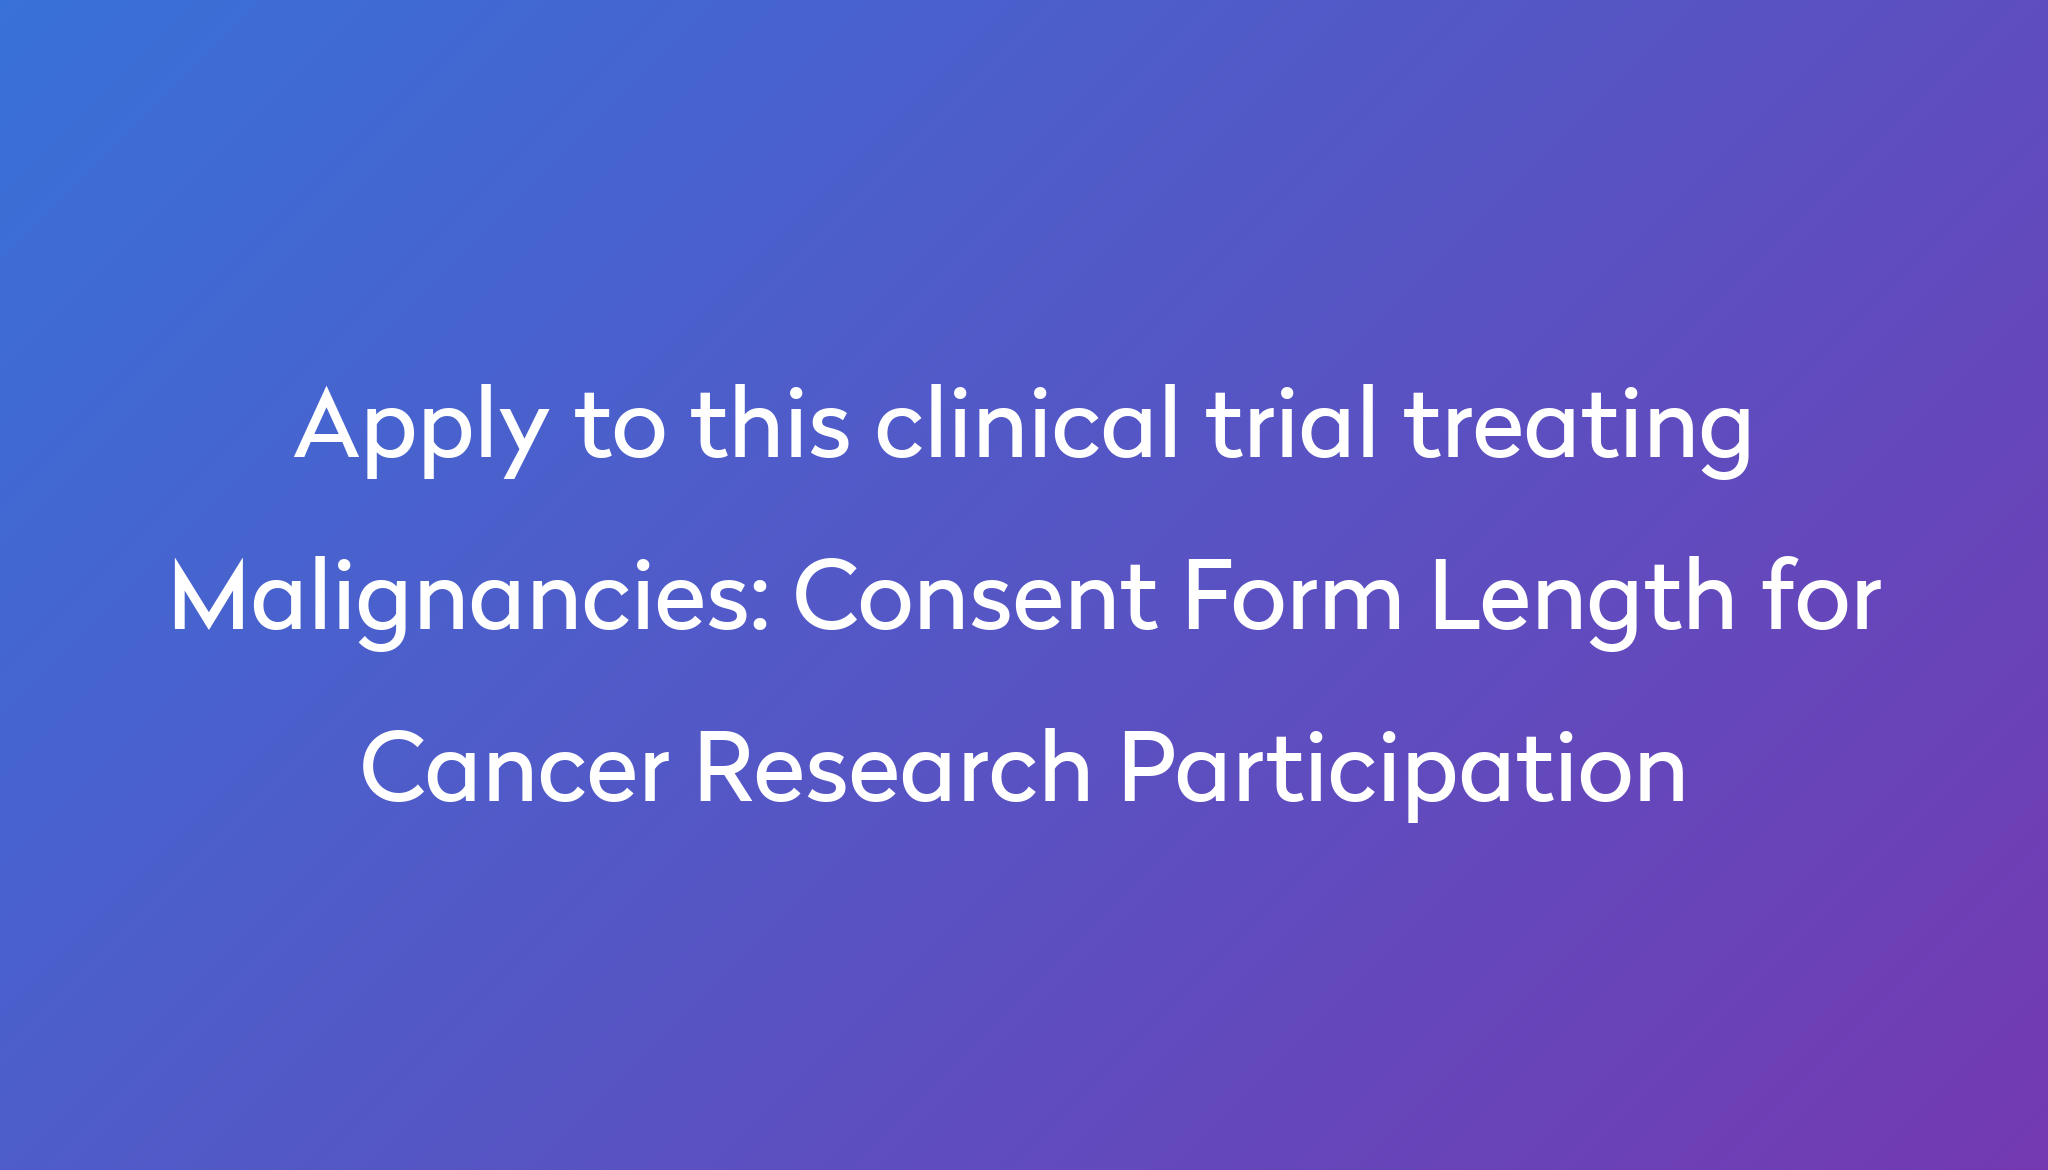 Consent Form Length for Cancer Research Participation Clinical Trial